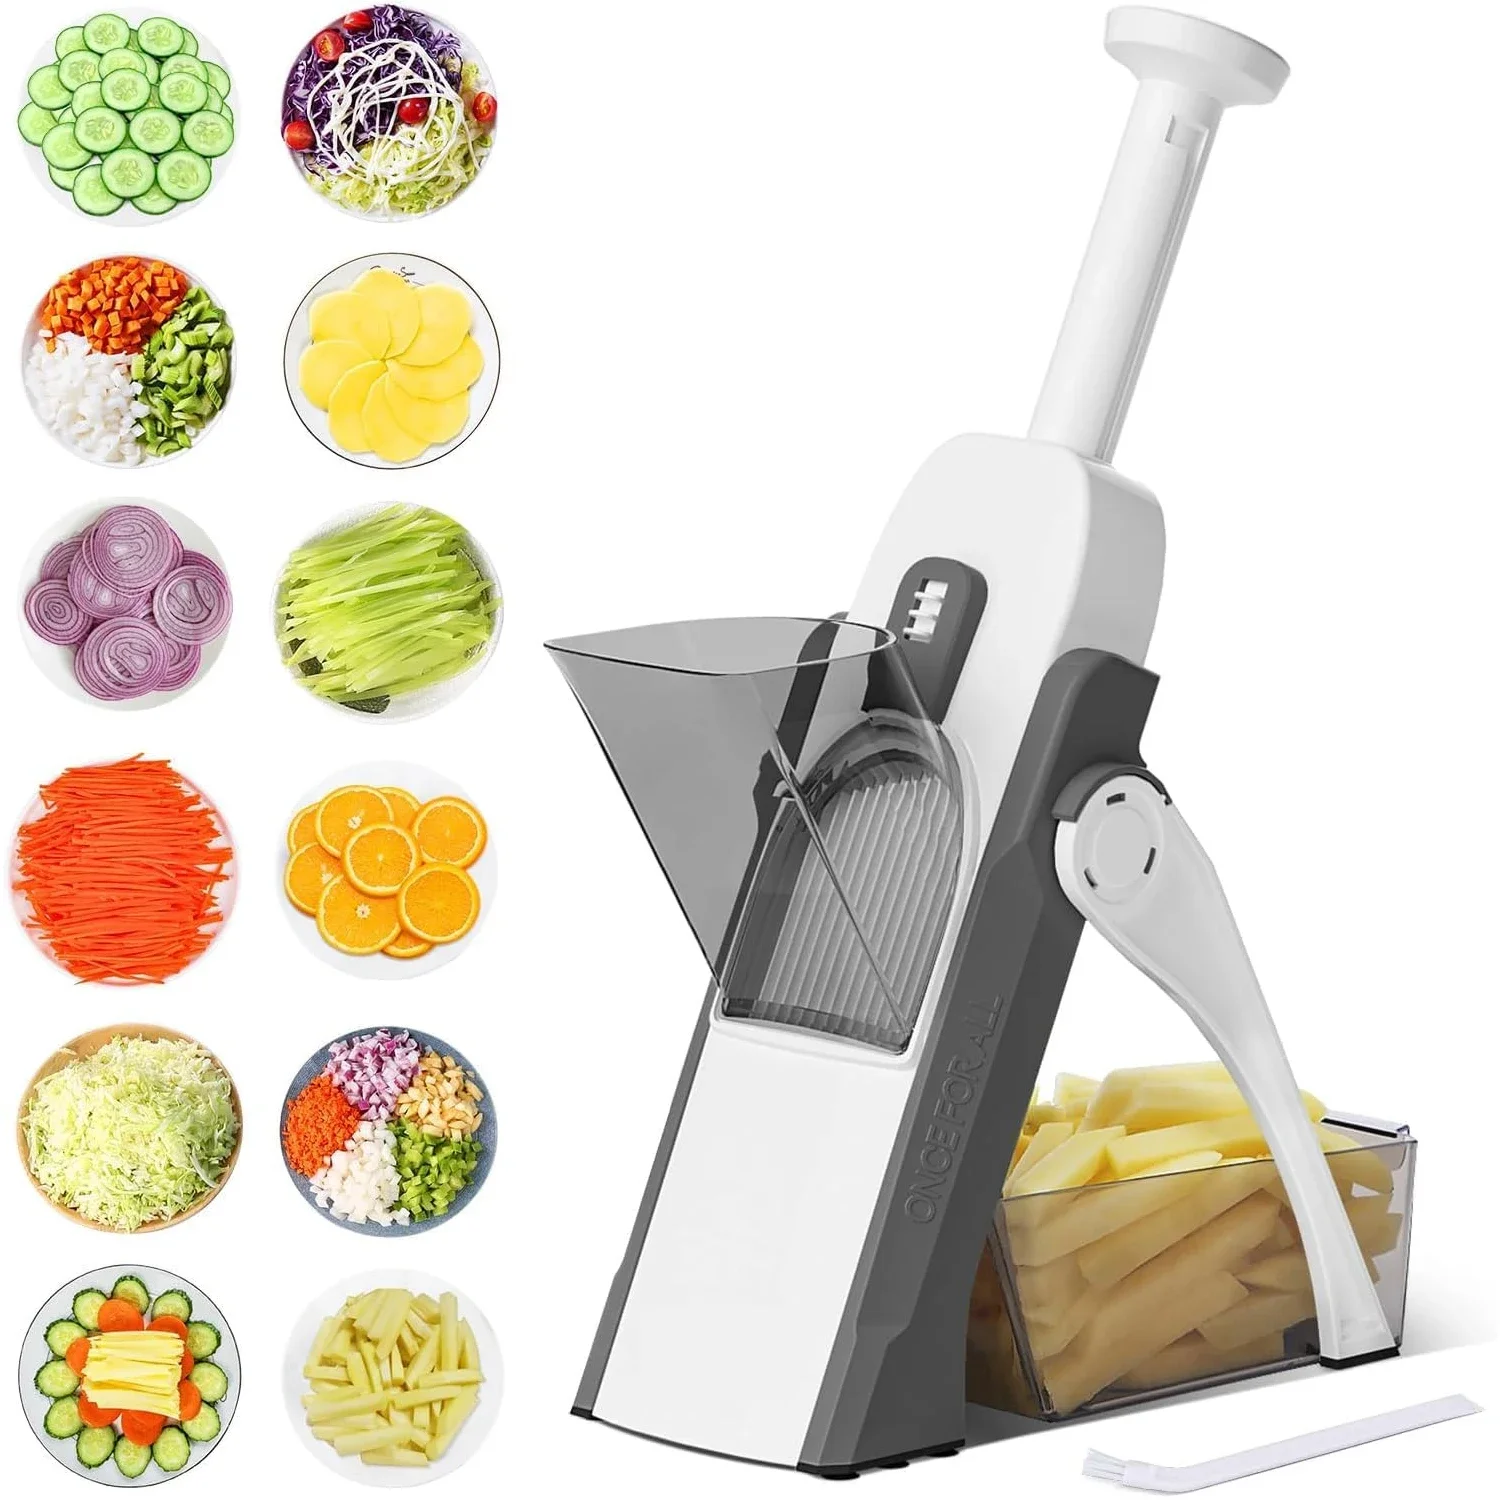 S3bd569b01cf54638960351dba2967d9dR Multi Vegetable Chopper Potato Slicer Food Veggie Cutter Carrot Grater French Fries Onion Shredders Cheese Graters Kitchen Tool